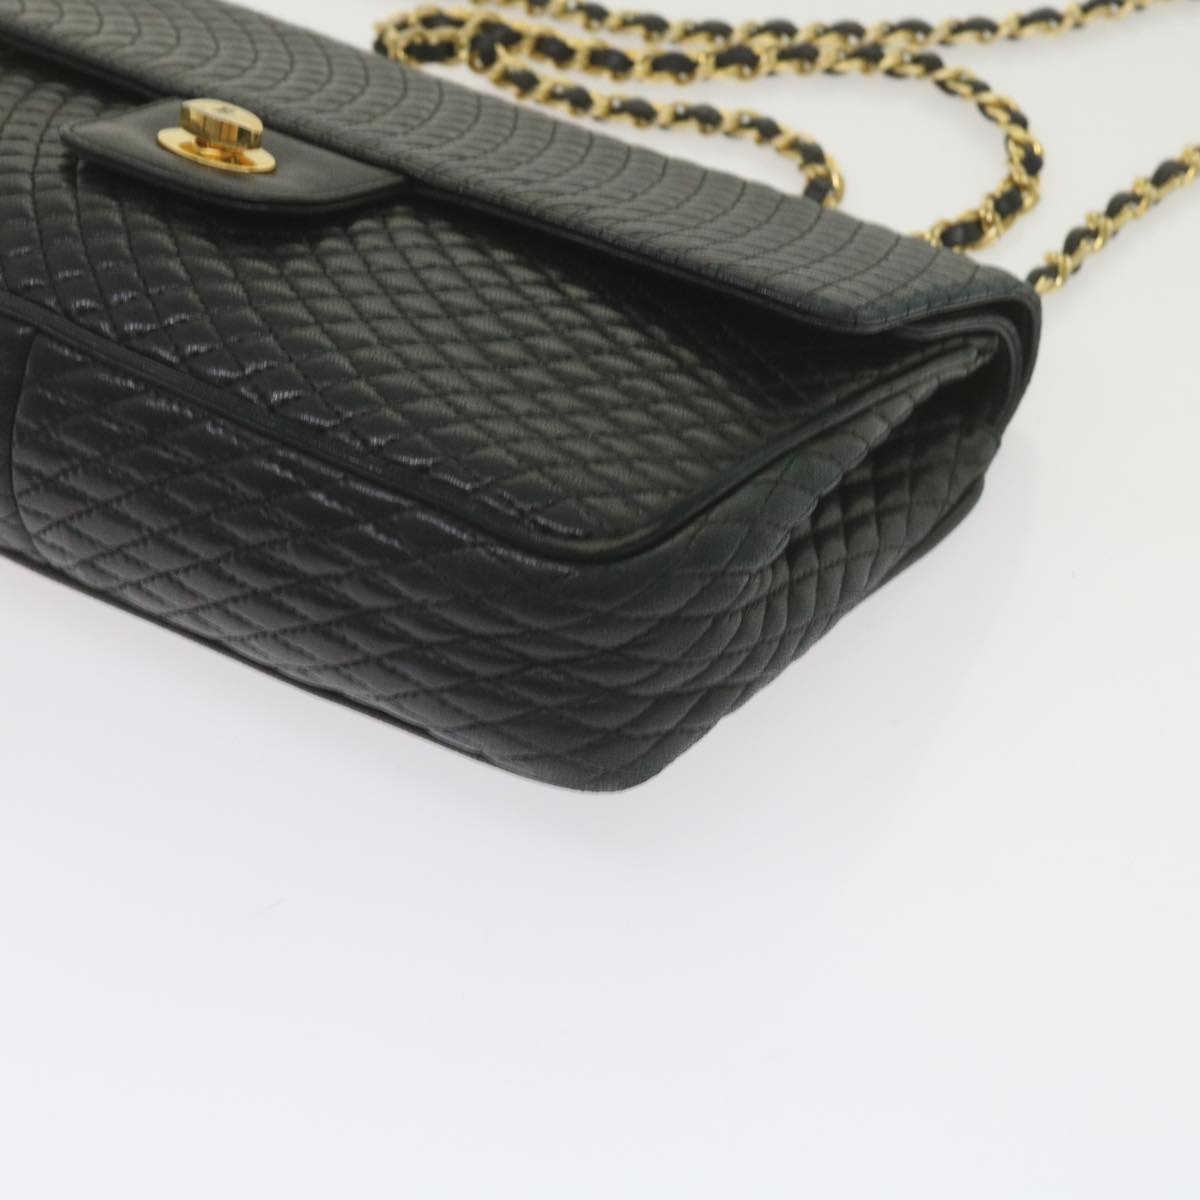 BALLY Chain Shoulder Bag Leather Black Auth 60659